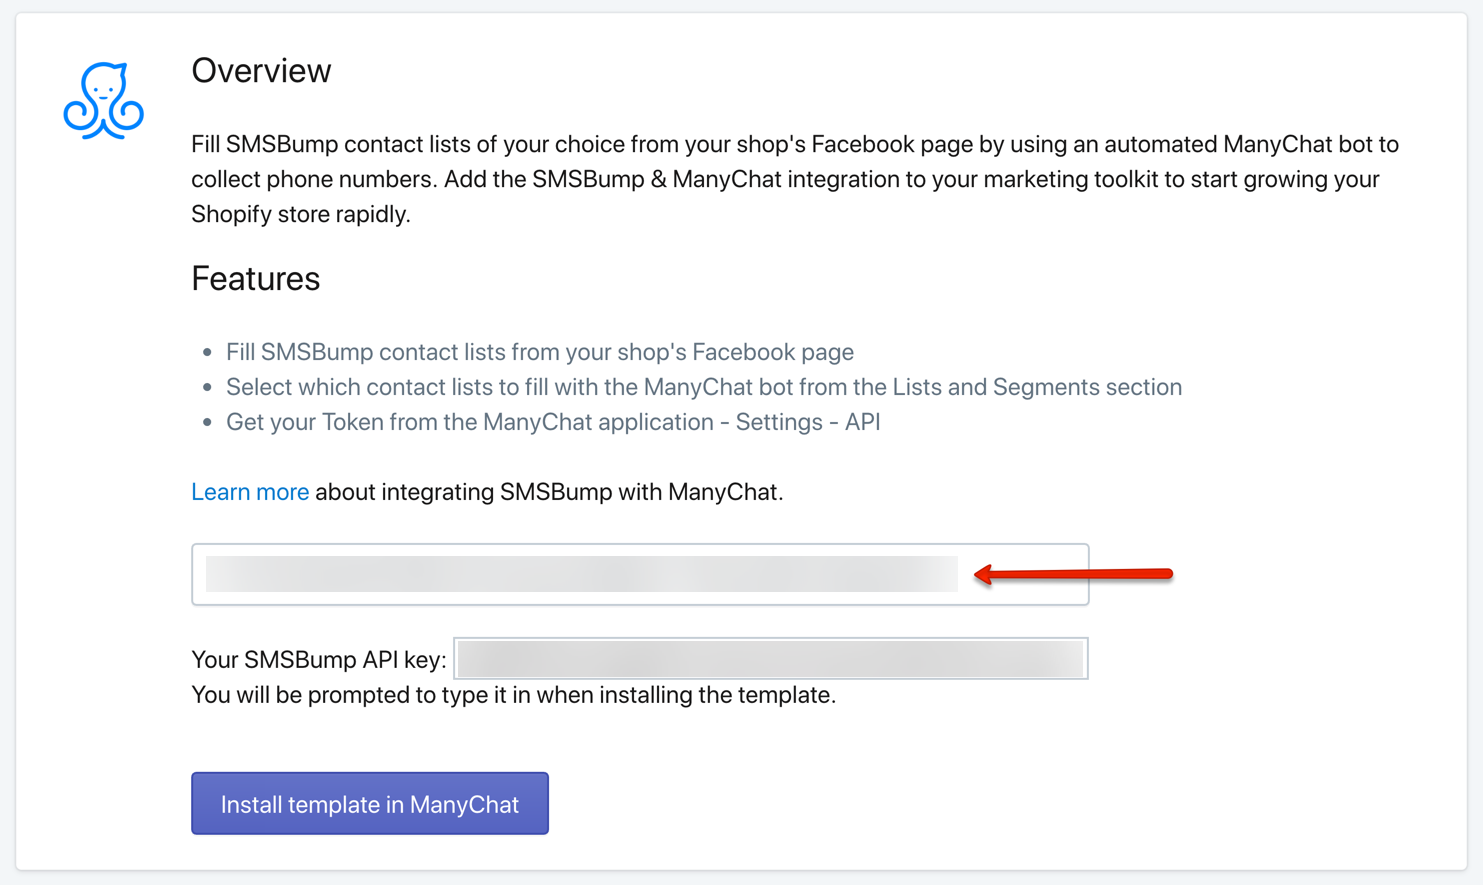 How to Setup SMSBump Subscriber Growth Flows with ManyChat in Shopify